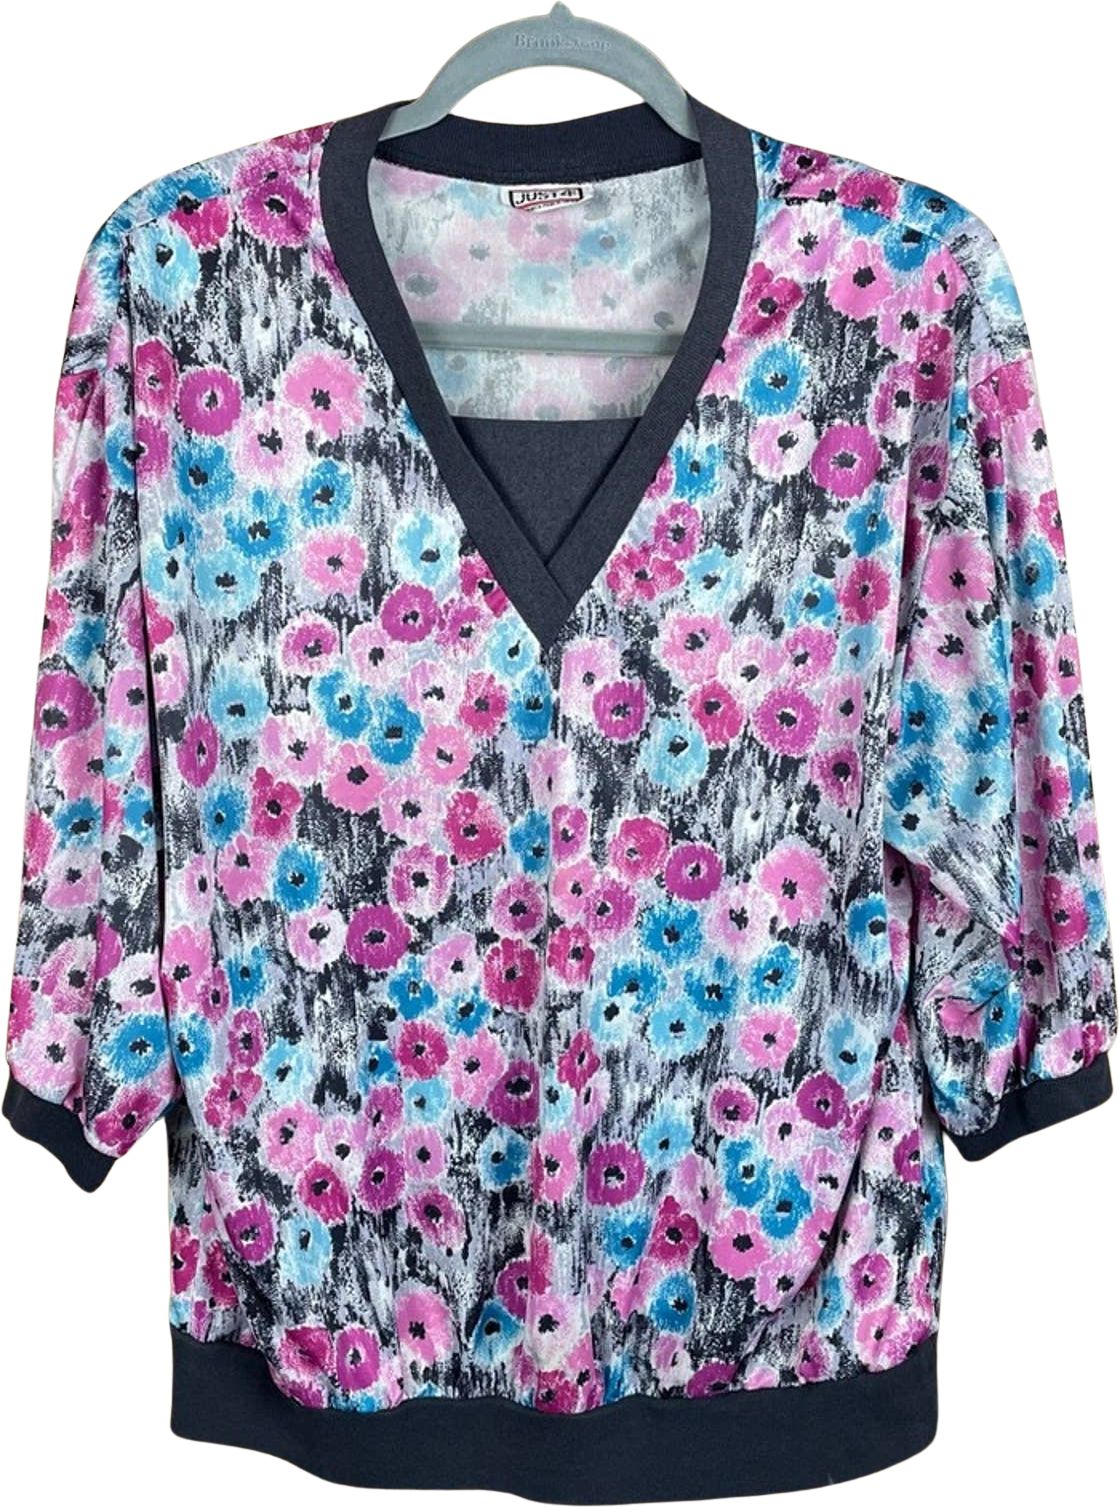 Vintage Layered Look Pink and Blue Poppy Floral Print Popover 